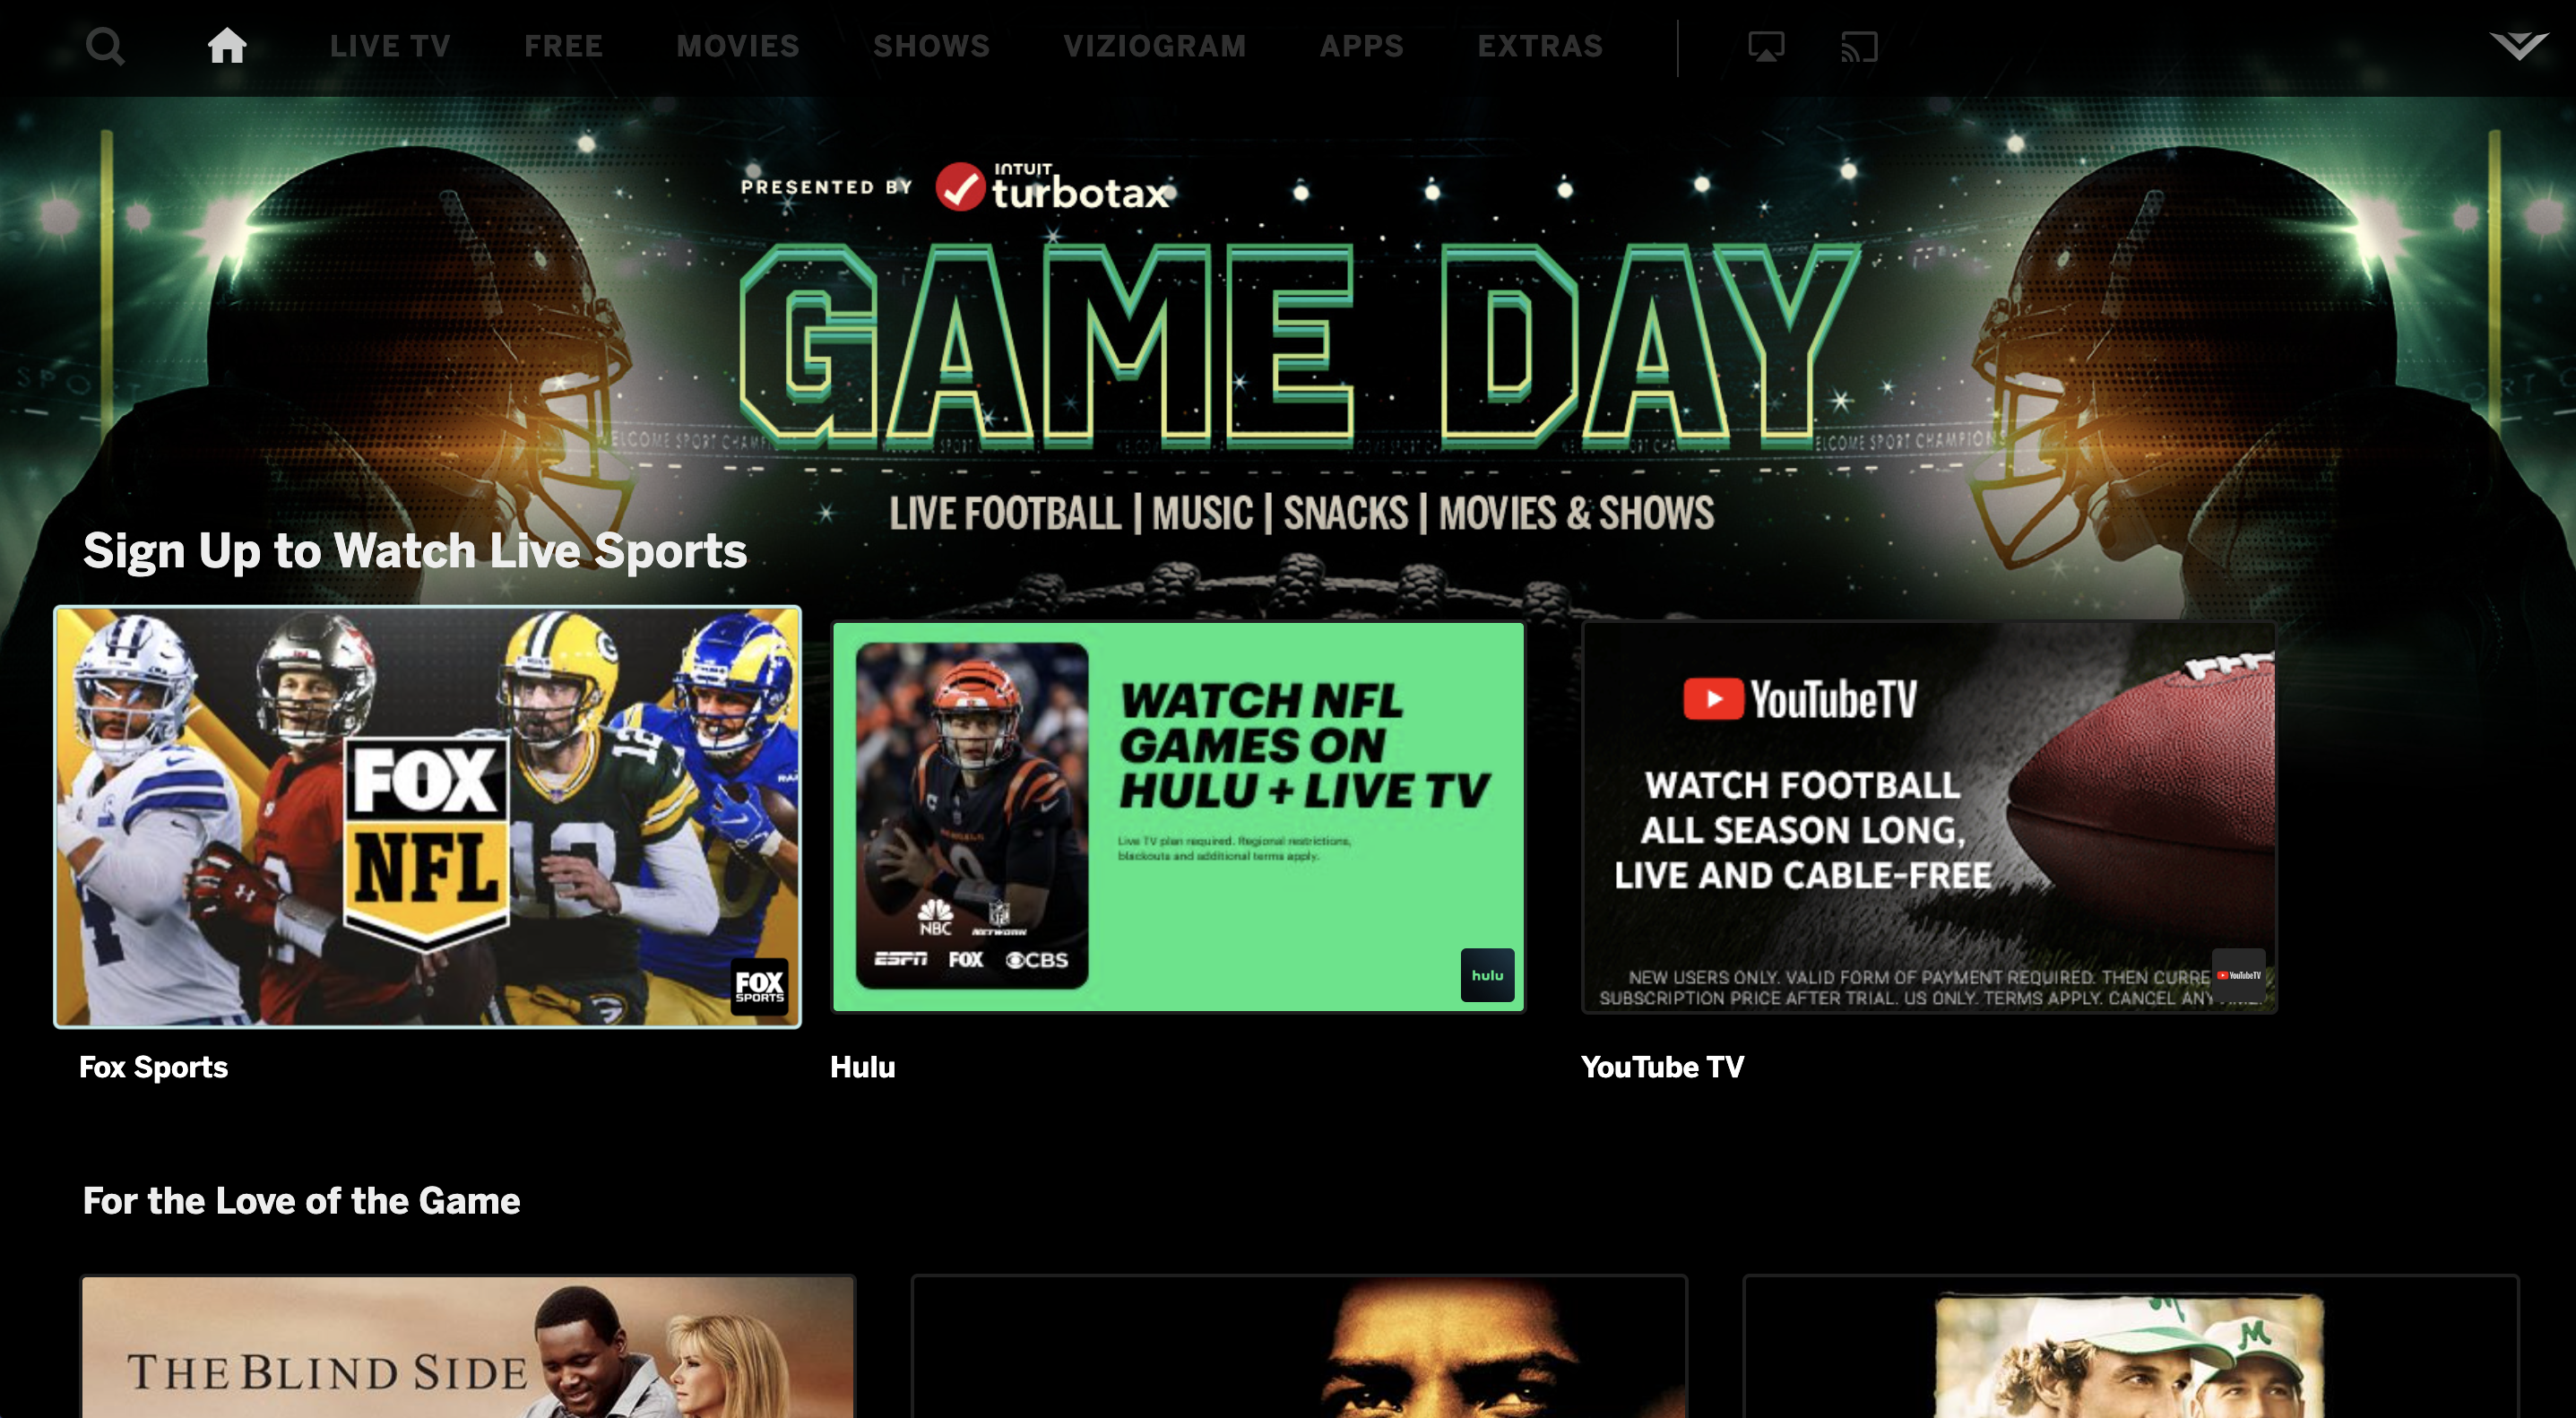 Sponsored Game Day Hub Brings Branded Collections To The VIZIO Home Screen